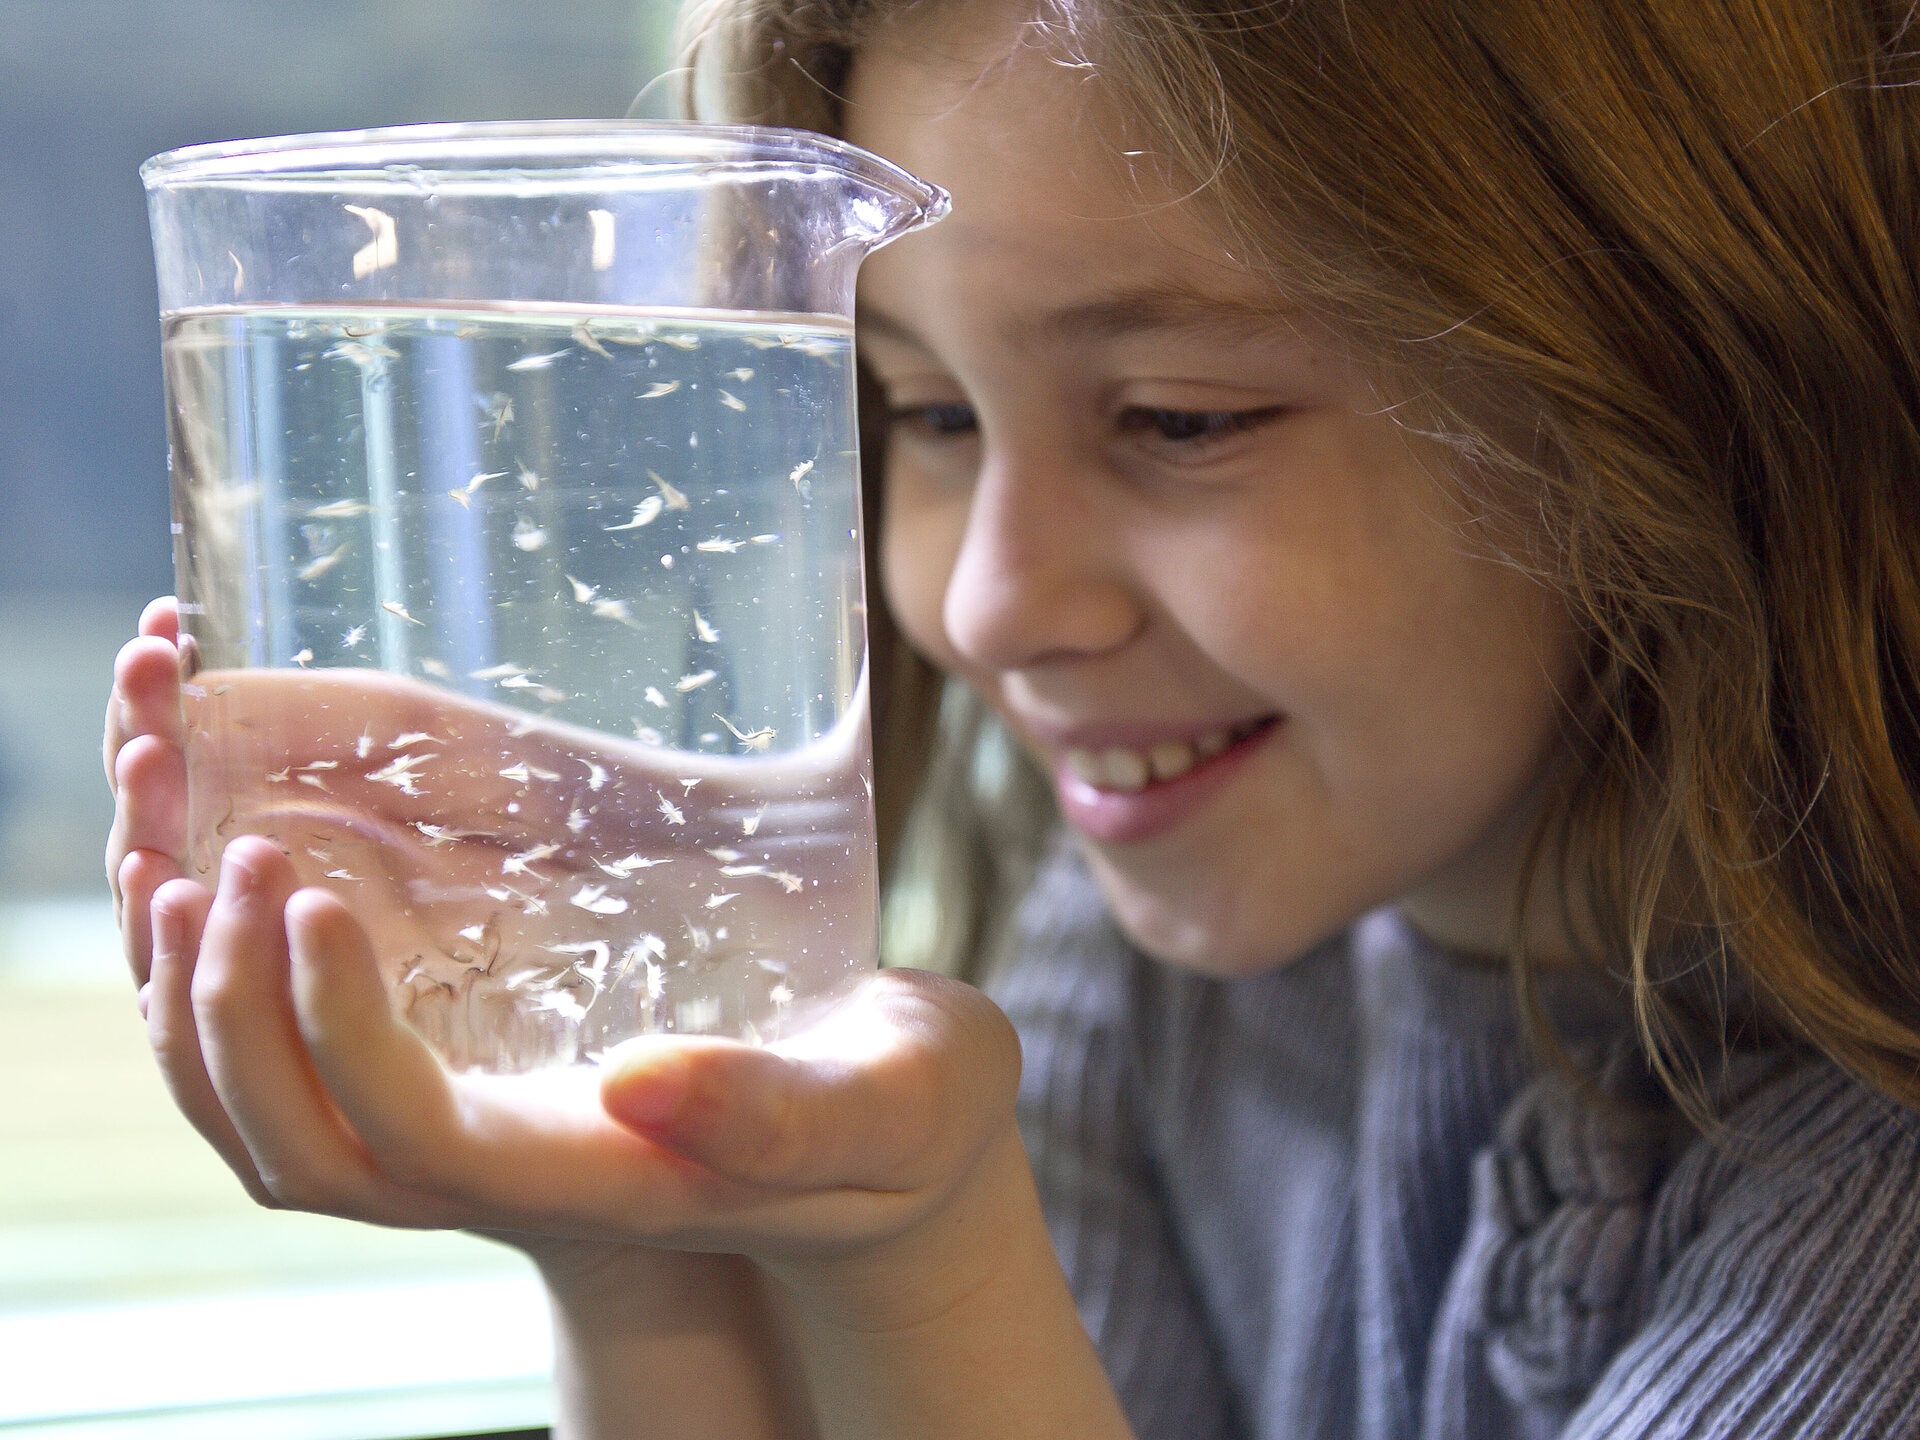 Girl holding and looking inside jar filled with sea creatures